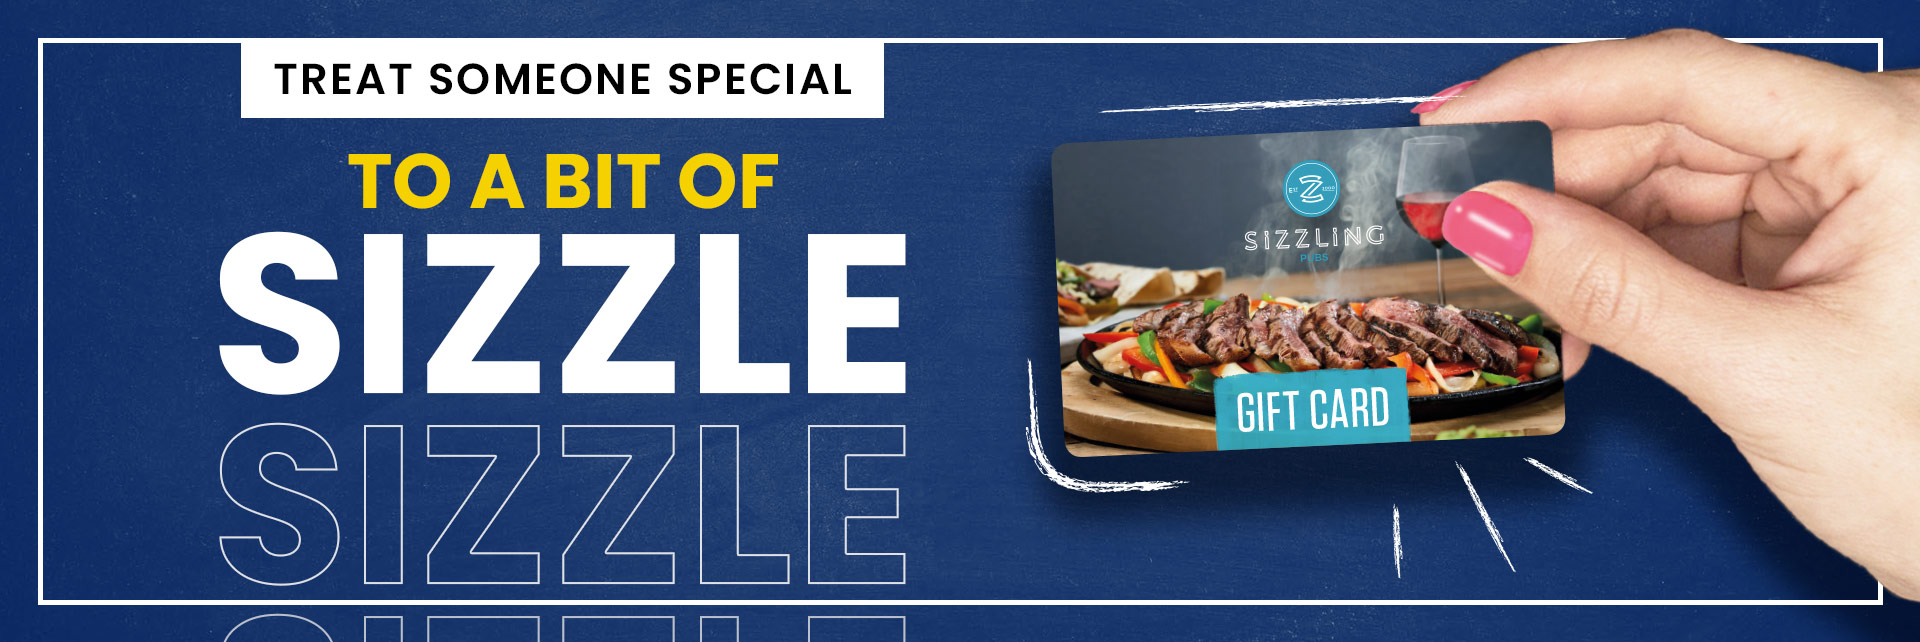 Sizzling Pubs Gift Card at The Wrose Bull in Shipley